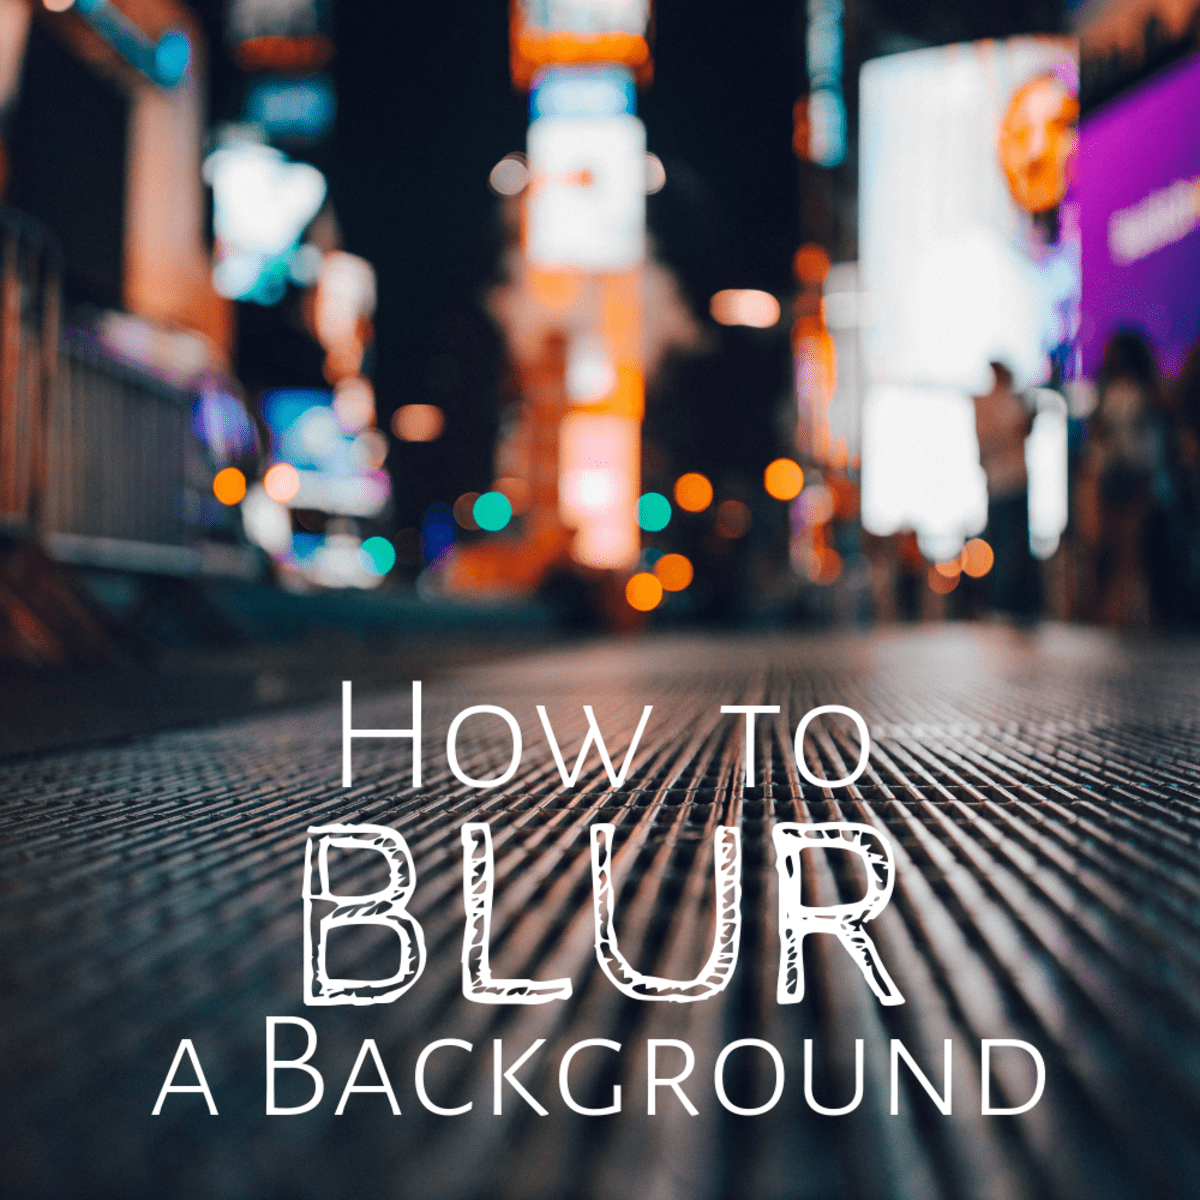 How to Take a Photo With a Blurred Background - FeltMagnet